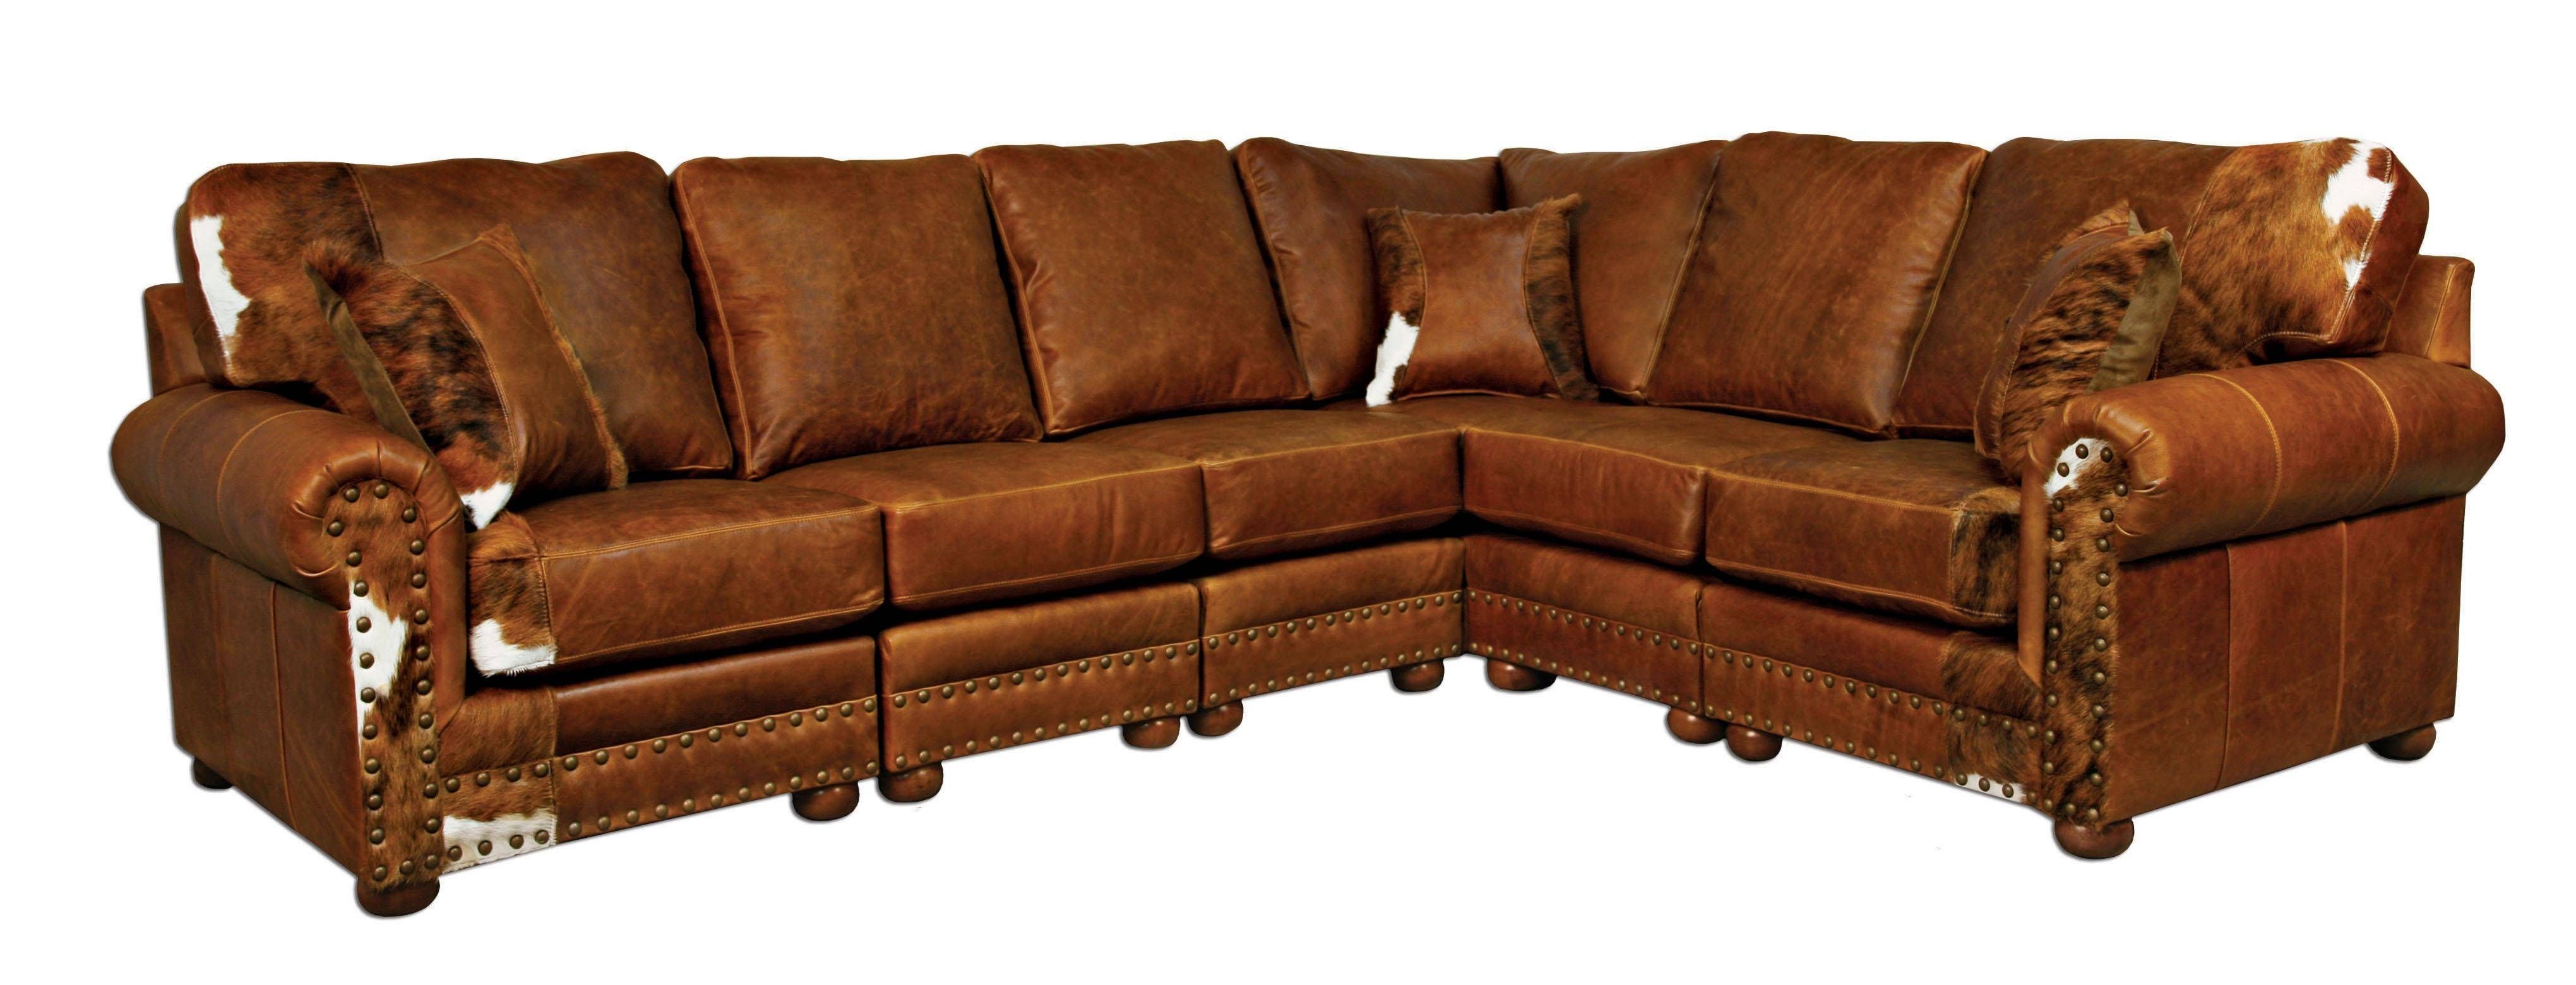 Sofas Center Rustic Sectional Sofas Wonderful Western Style With Throughout Western Style Sectional Sofas 